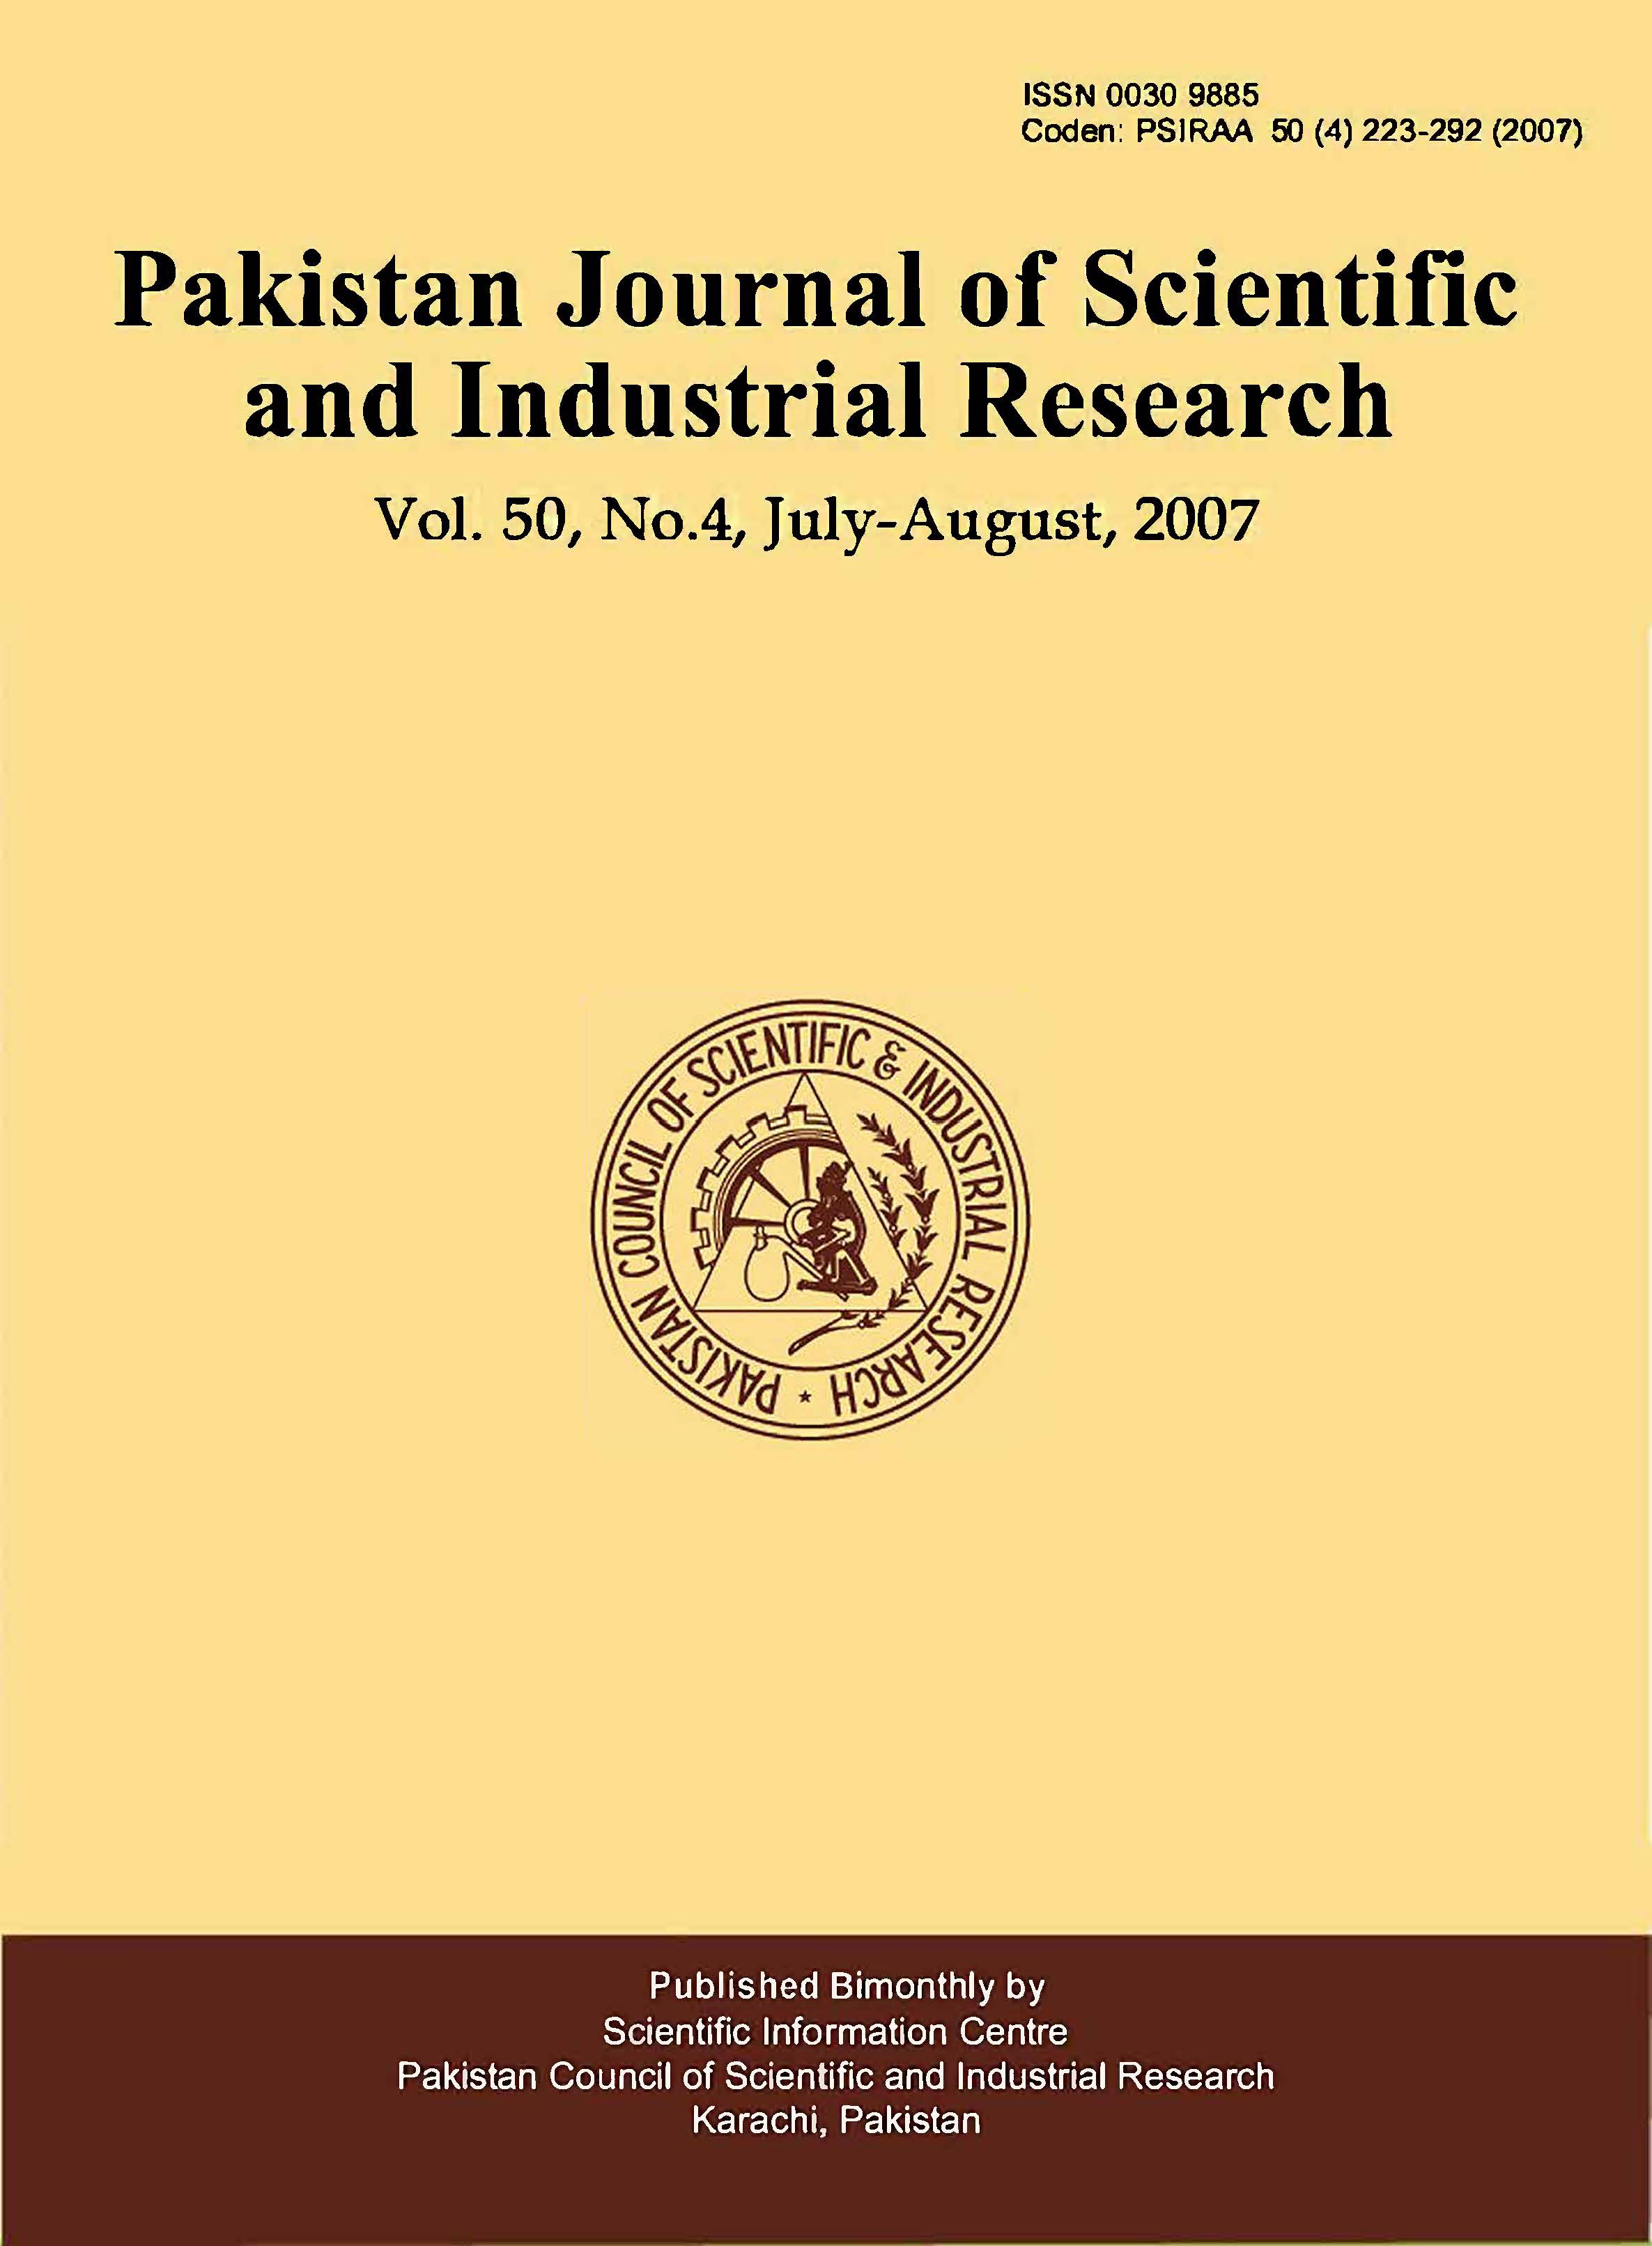 					View Vol. 50 No. 4 (2007): Pakistan Journal of Scientific and Industrial Research
				